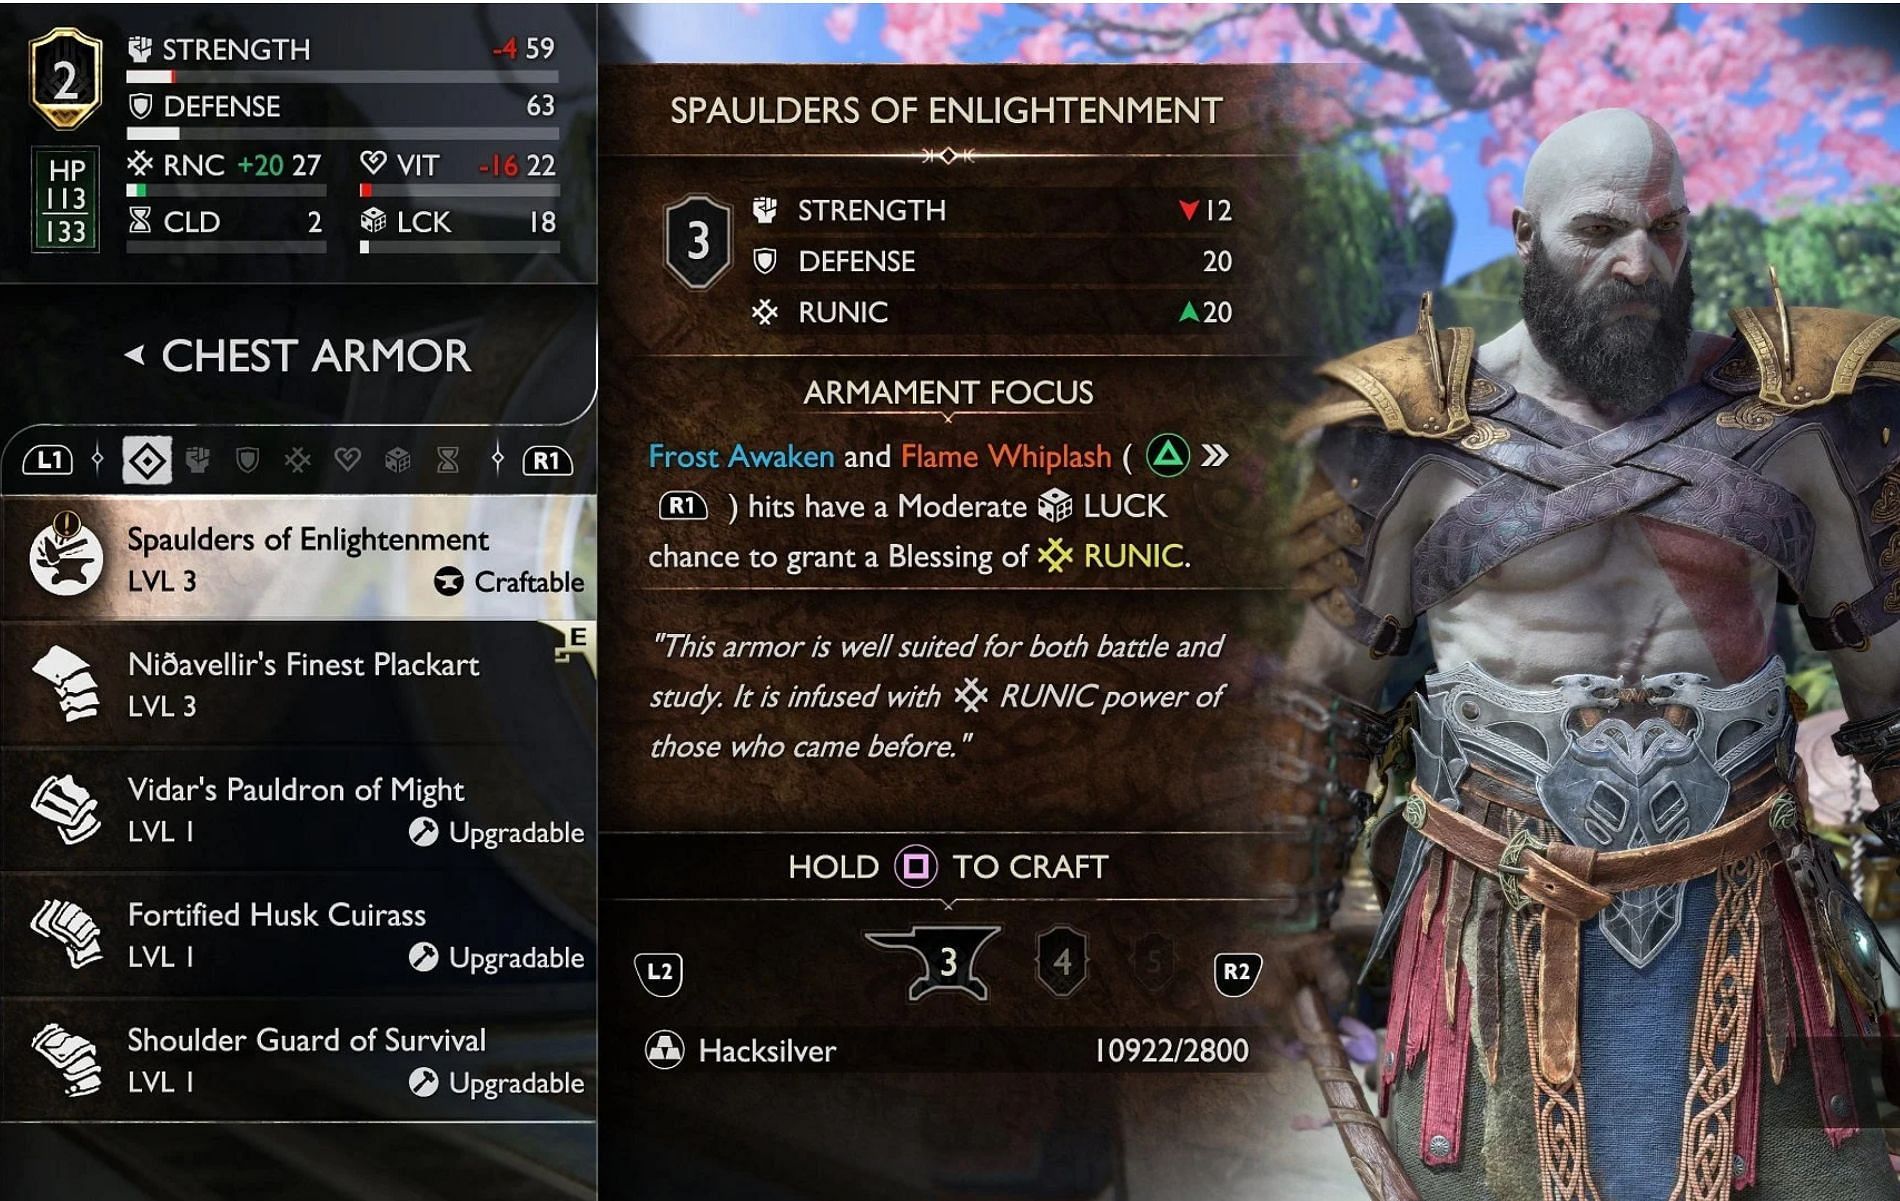 Each individual component of the Enlightenment Armor Set can be upgraded separately by spending Hacksilvers (Image via Santa Monica Studio)